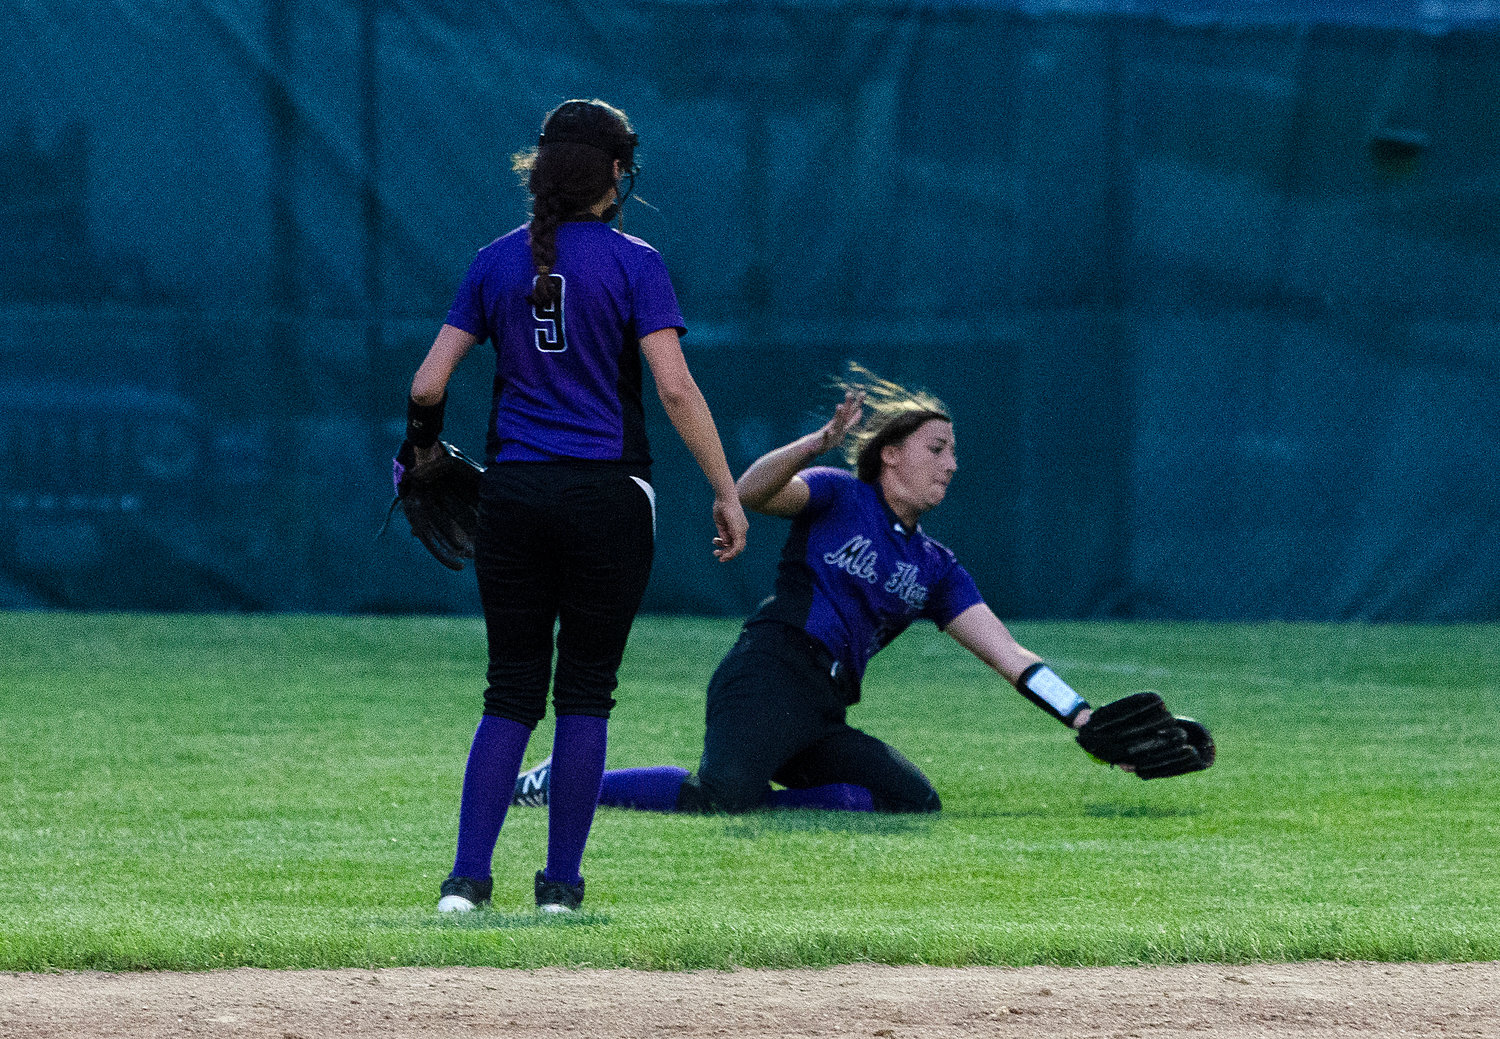 Huskies right fielder Logan Leveque slides to make a catch, but the ball grazed her glove and bounced into the outfield.